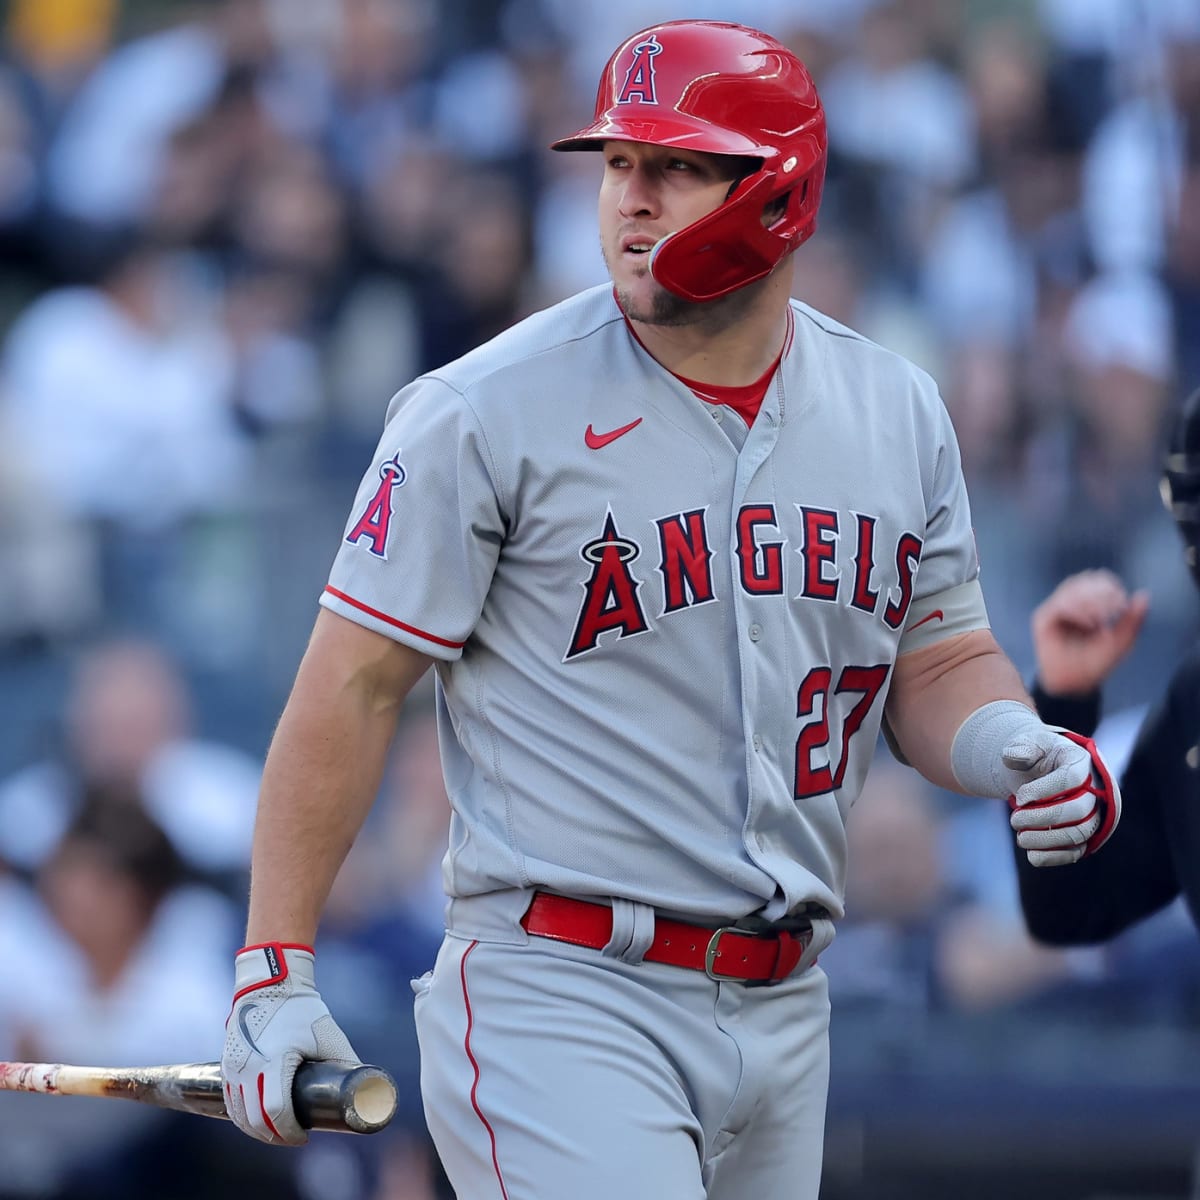 LA Angels' baseball MVP Mike Trout wants to be a meteorologist